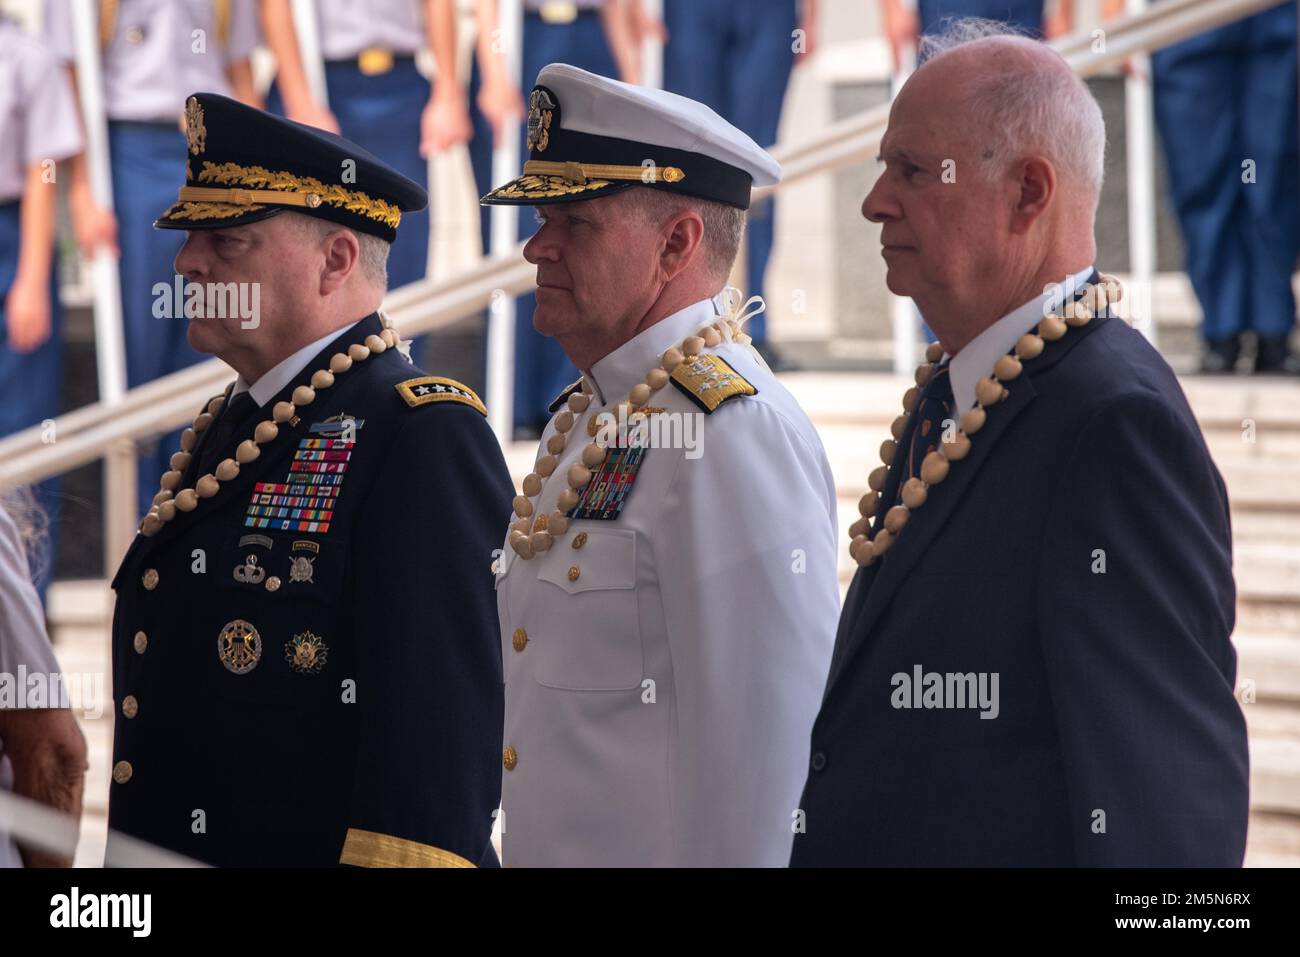 HONOLULU (March 29, 2022) Gen. Mark Milley, chairman of the Joint Chiefs of Staff, left, Adm. Samuel Paparo, commander, U.S. Pacific Fleet, center, and retired General, U.S. Army, David Bramlett, attend the Vietnam War Veterans Day Ceremony at the National Memorial Cemetery of the Pacific. Service members, veterans, distinguished guests, and spectators gathered to honor over three million men and women who served and sacrificed during the Vietnam War. Stock Photo